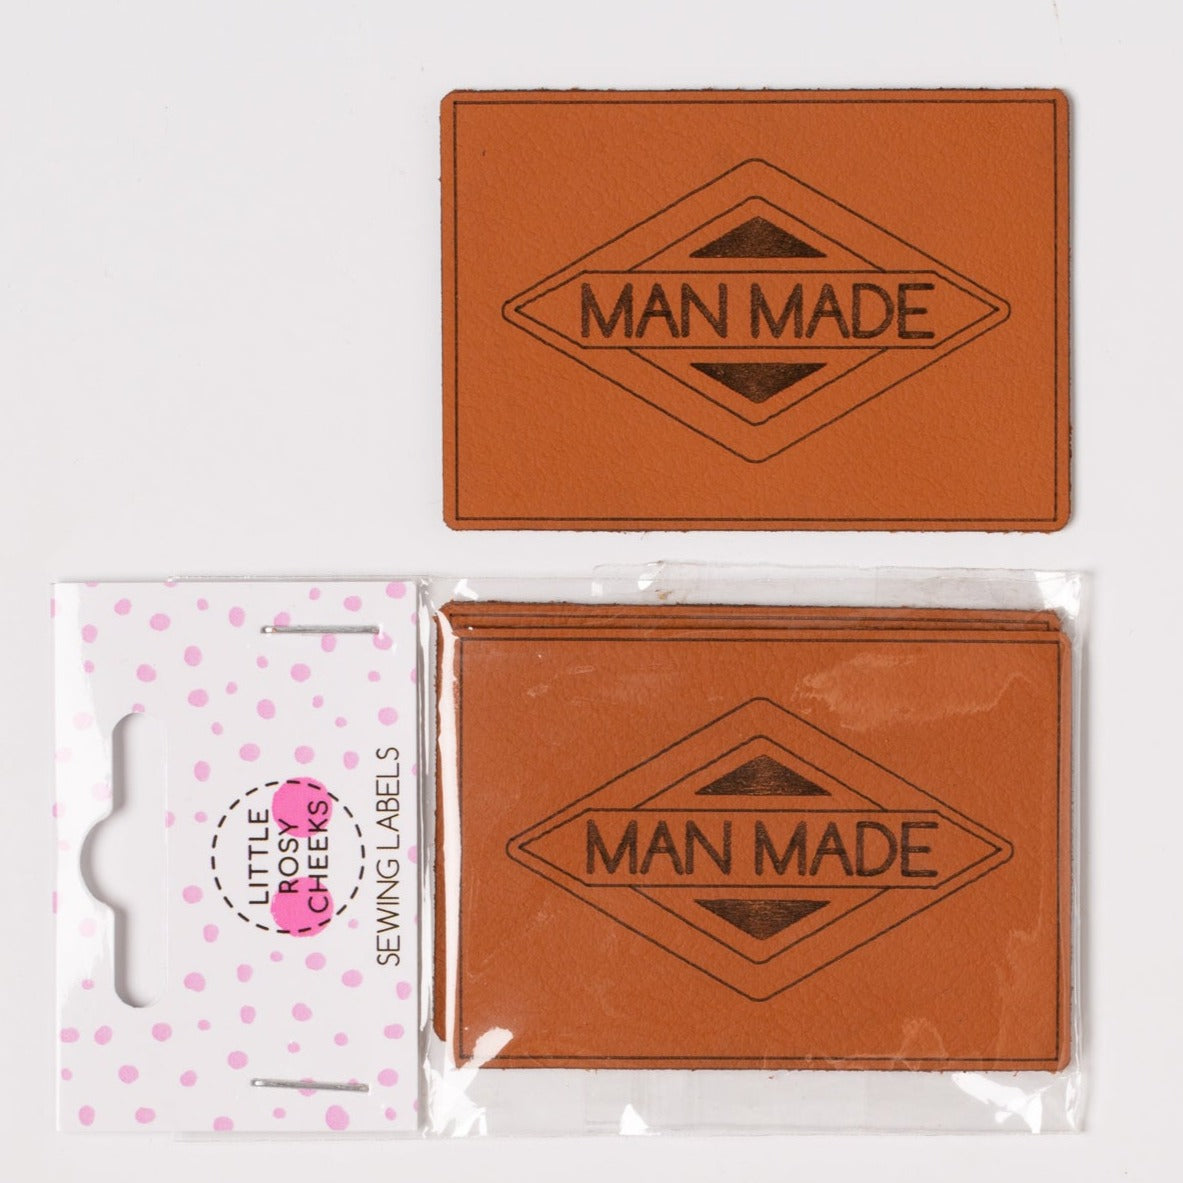 MAN MADE Pack of 2 Leather Jeans Labels - Whisky Tan